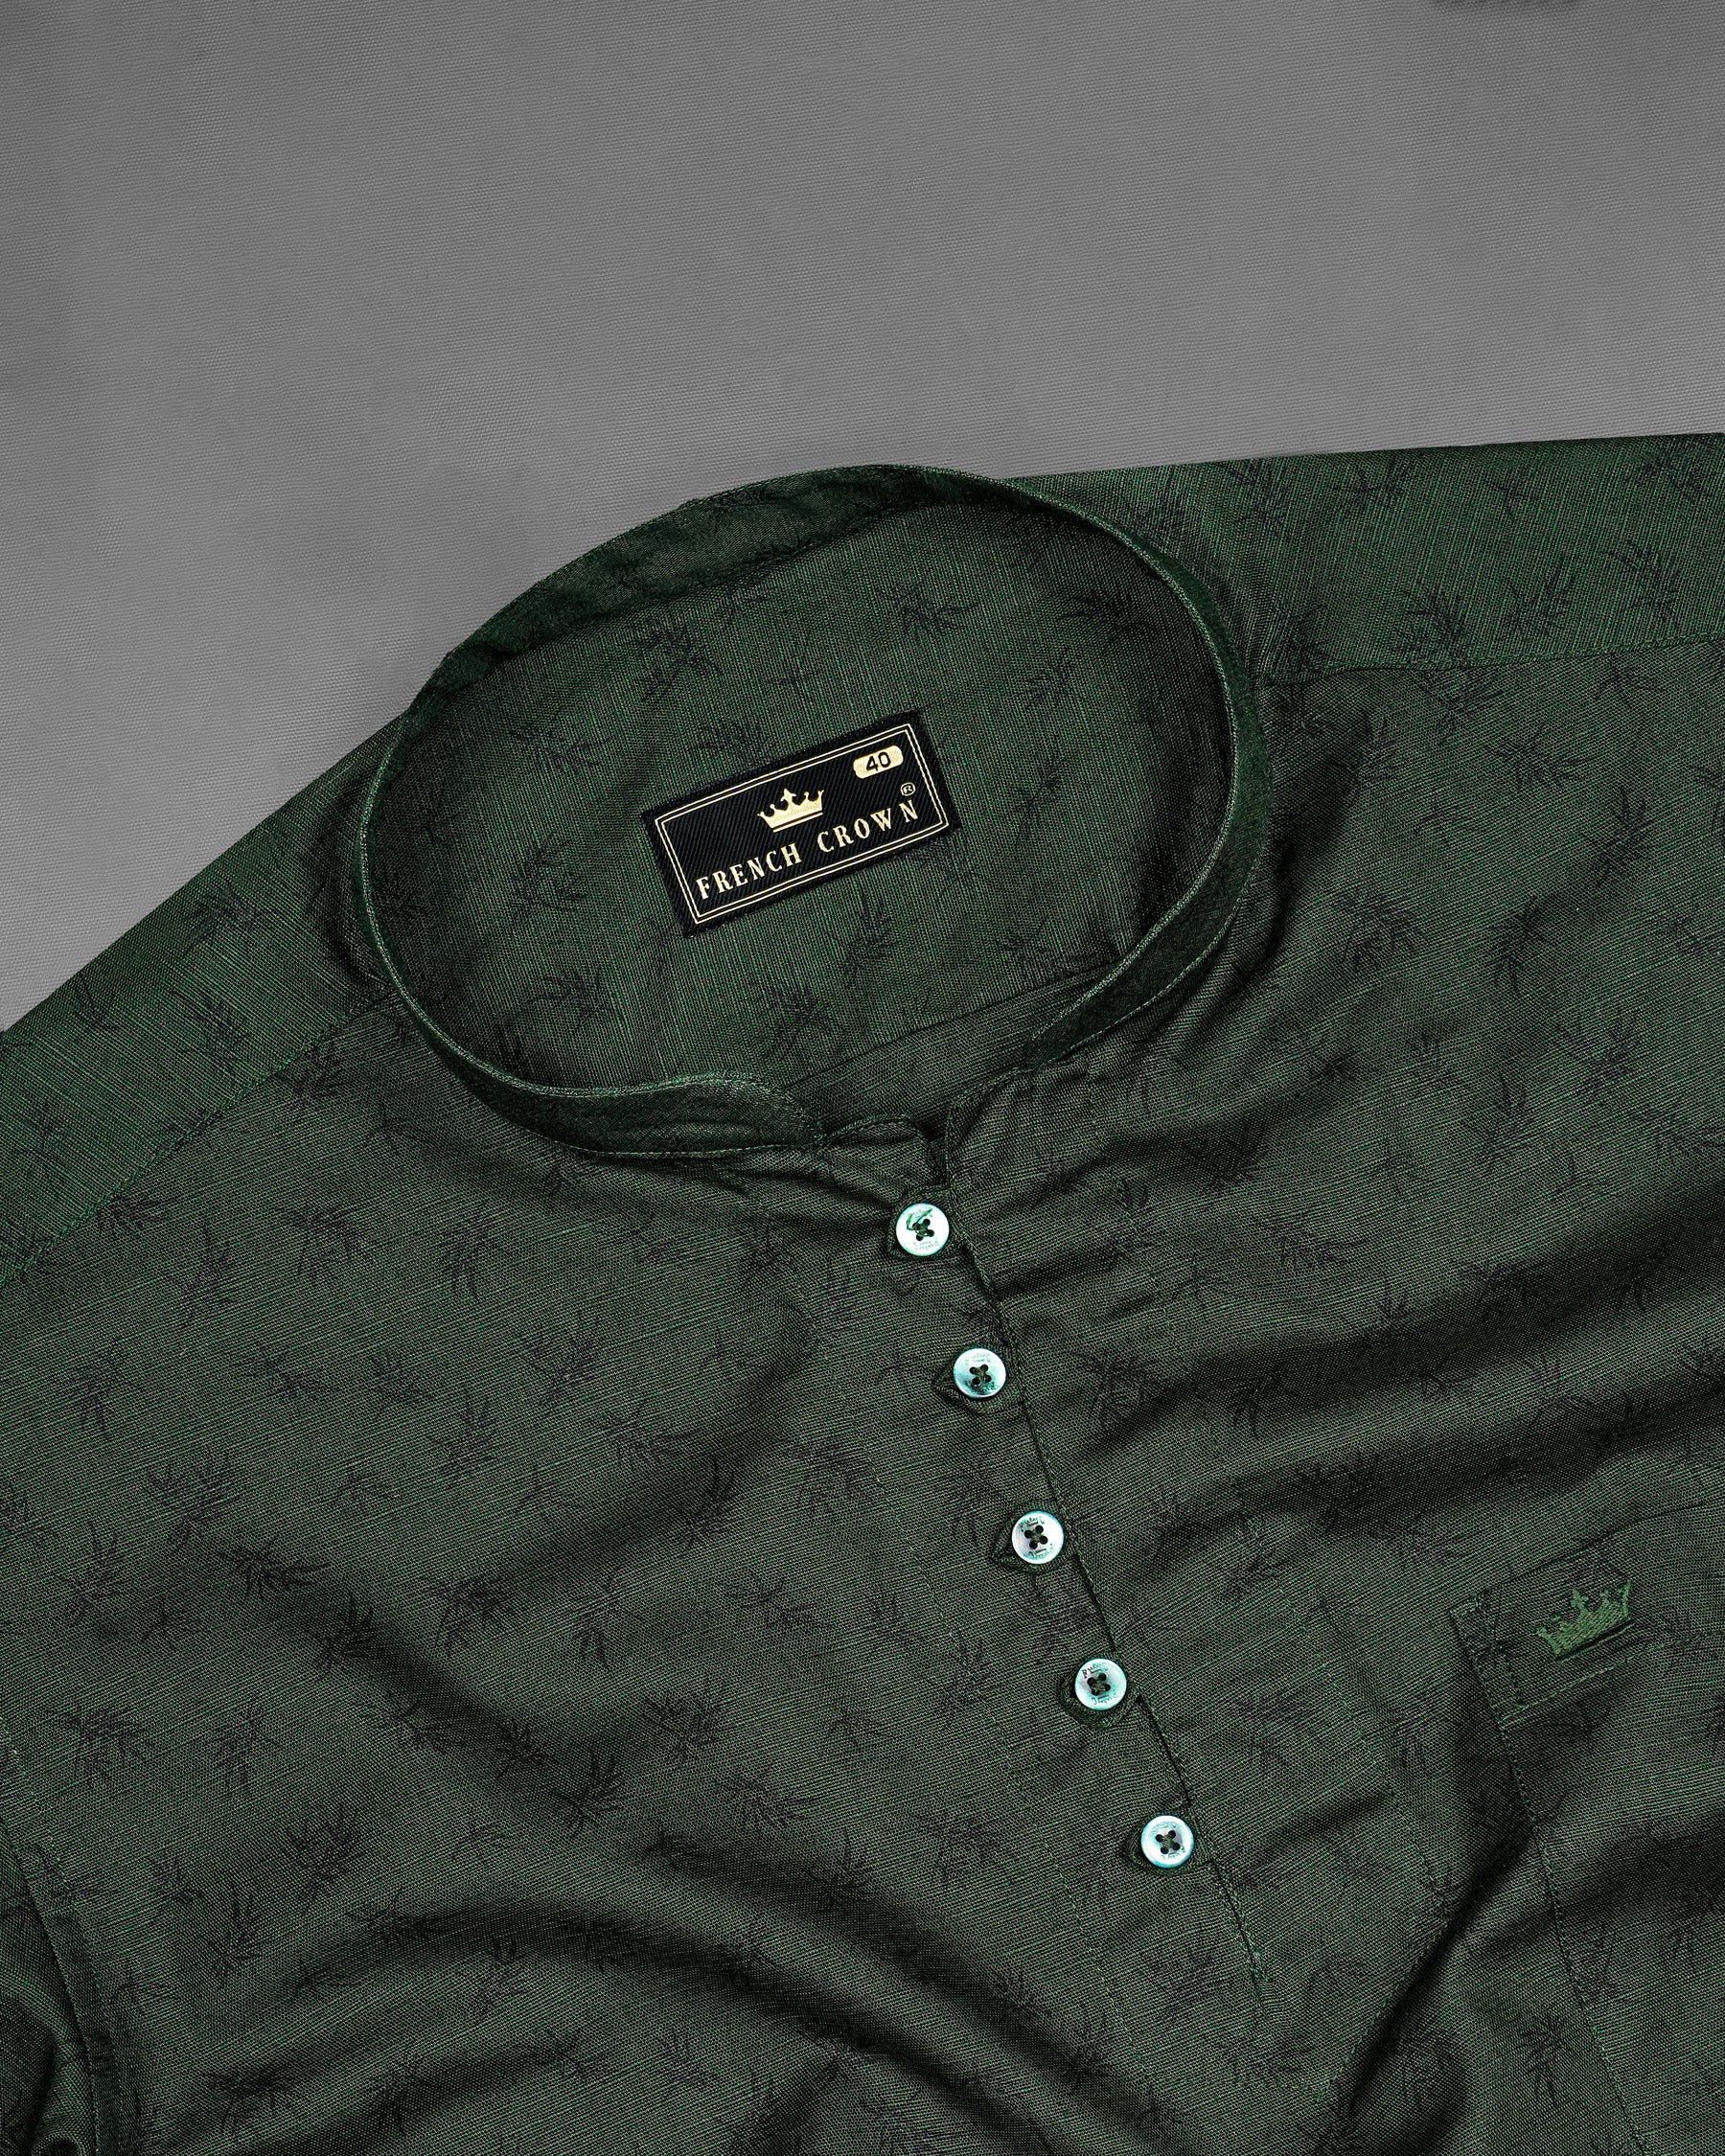 Lunar Green and Black Two Tone Luxurious Linen Kurta Shirt 8327-KS-GR -38,8327-KS-GR -H-38,8327-KS-GR -39,8327-KS-GR -H-39,8327-KS-GR -40,8327-KS-GR -H-40,8327-KS-GR -42,8327-KS-GR -H-42,8327-KS-GR -44,8327-KS-GR -H-44,8327-KS-GR -46,8327-KS-GR -H-46,8327-KS-GR -48,8327-KS-GR -H-48,8327-KS-GR -50,8327-KS-GR -H-50,8327-KS-GR -52,8327-KS-GR -H-52